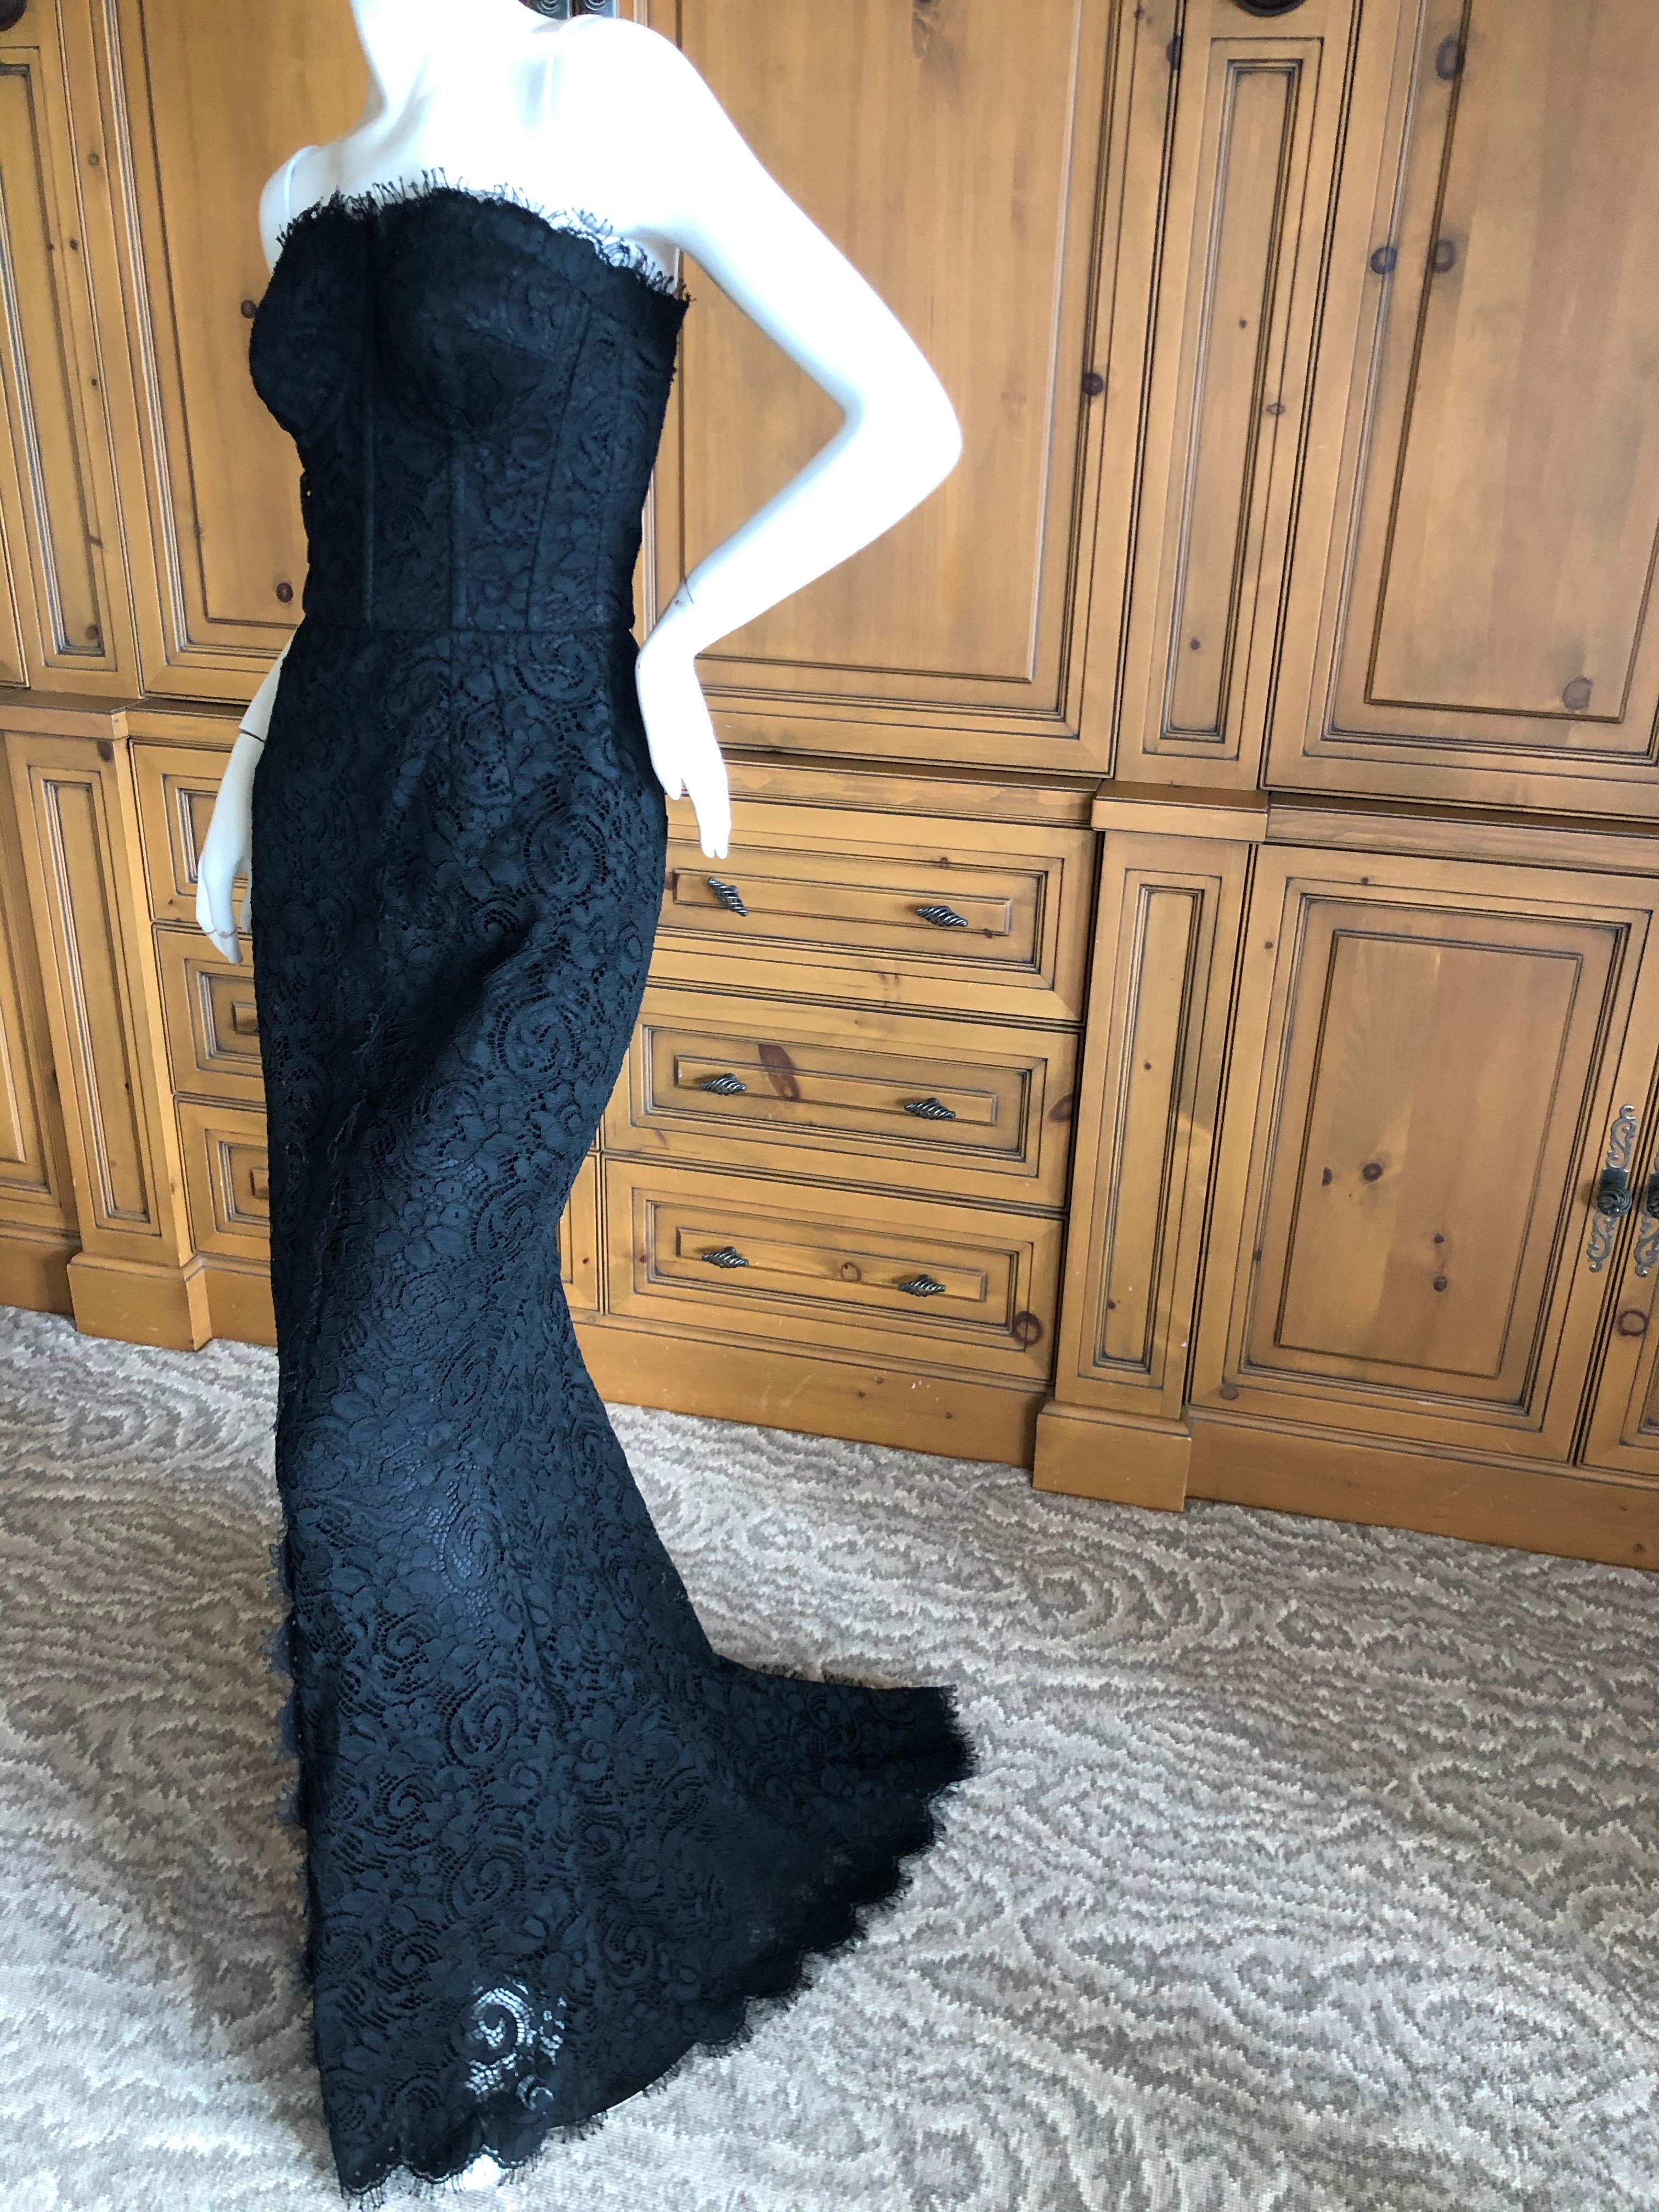 Dolce & Gabbana Vintage Black Lace Corseted Strapless Evening Gown  For Sale 2